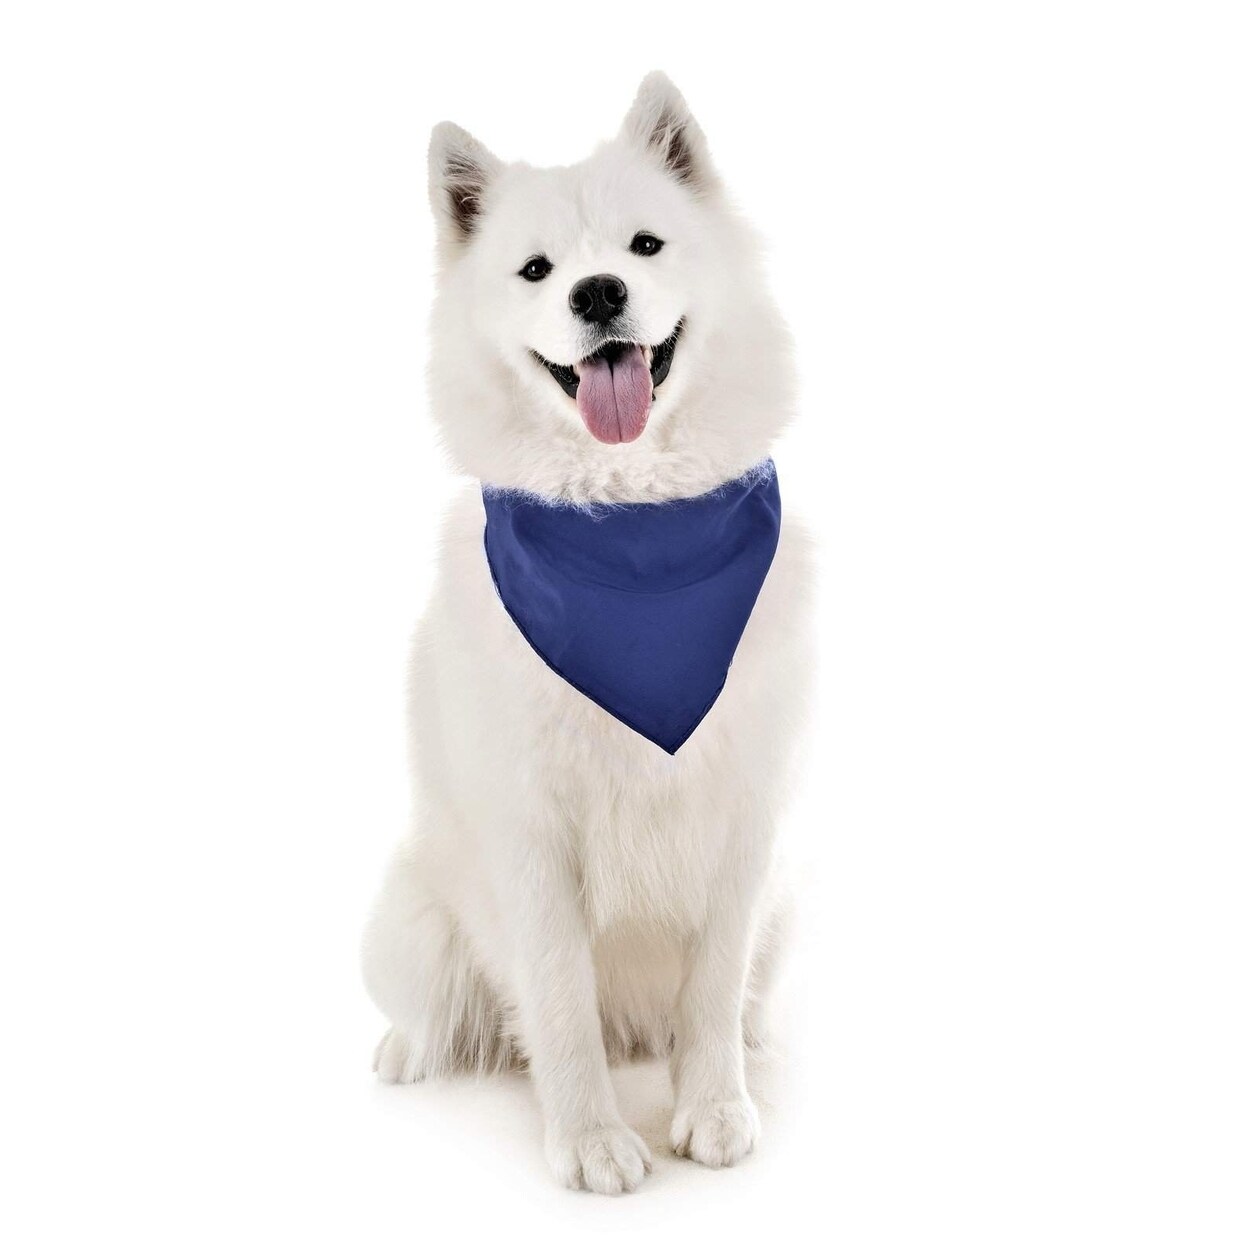 Mechaly   Dog Plain Bandanas - 2 Pack - Scarf Triangle Bibs for Small Medium and Large Puppies Dogs and Cats